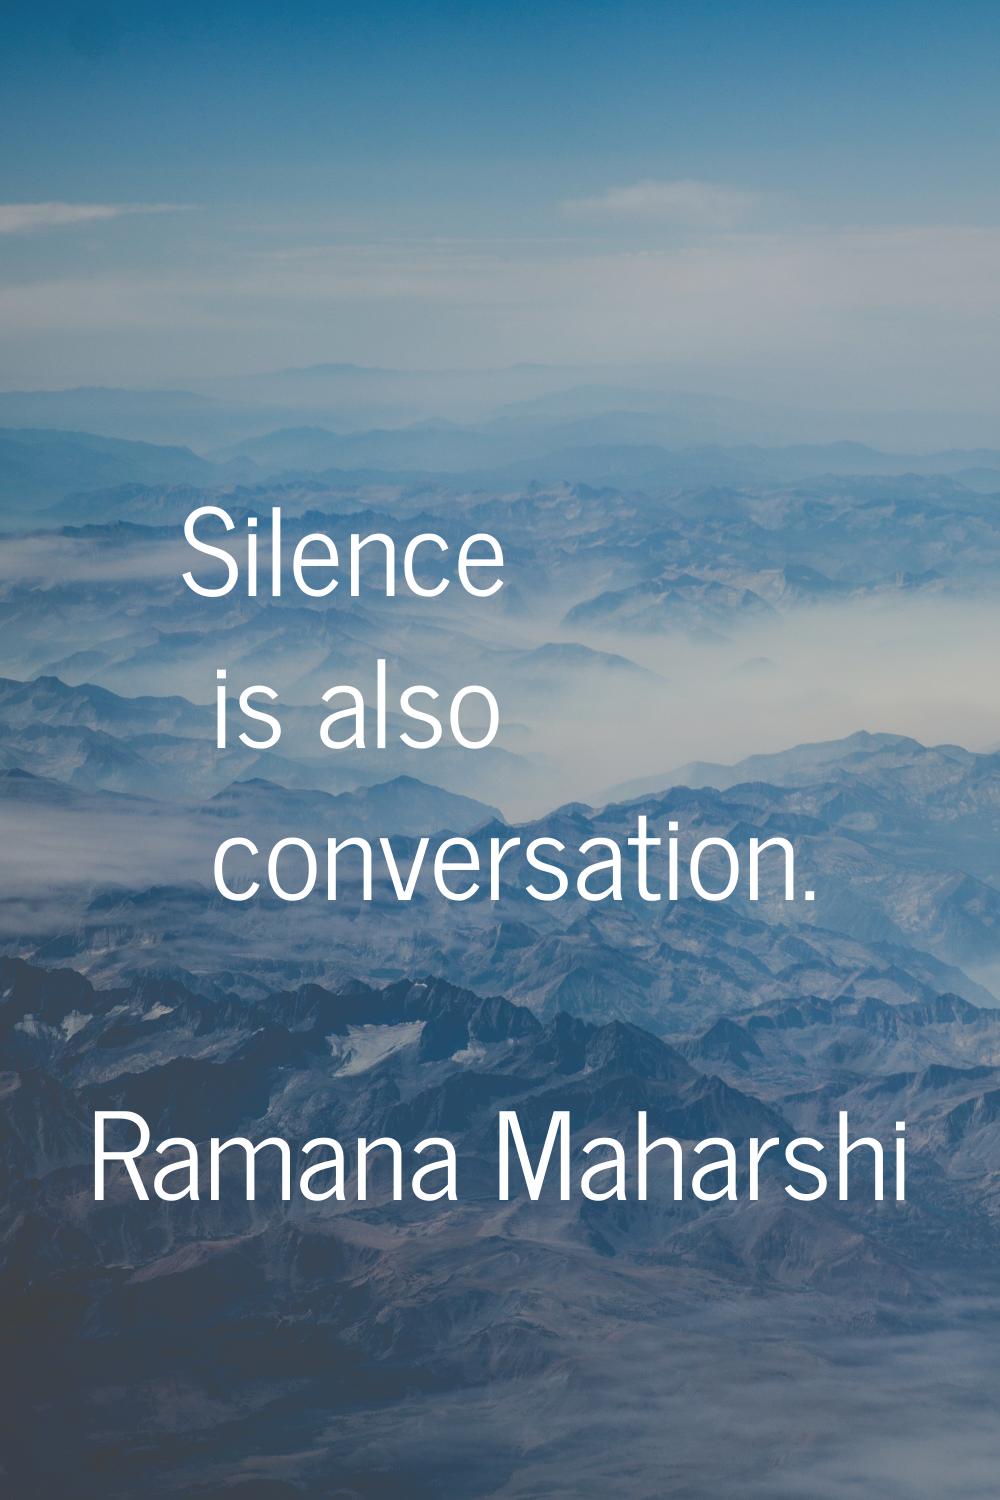 Silence is also conversation.